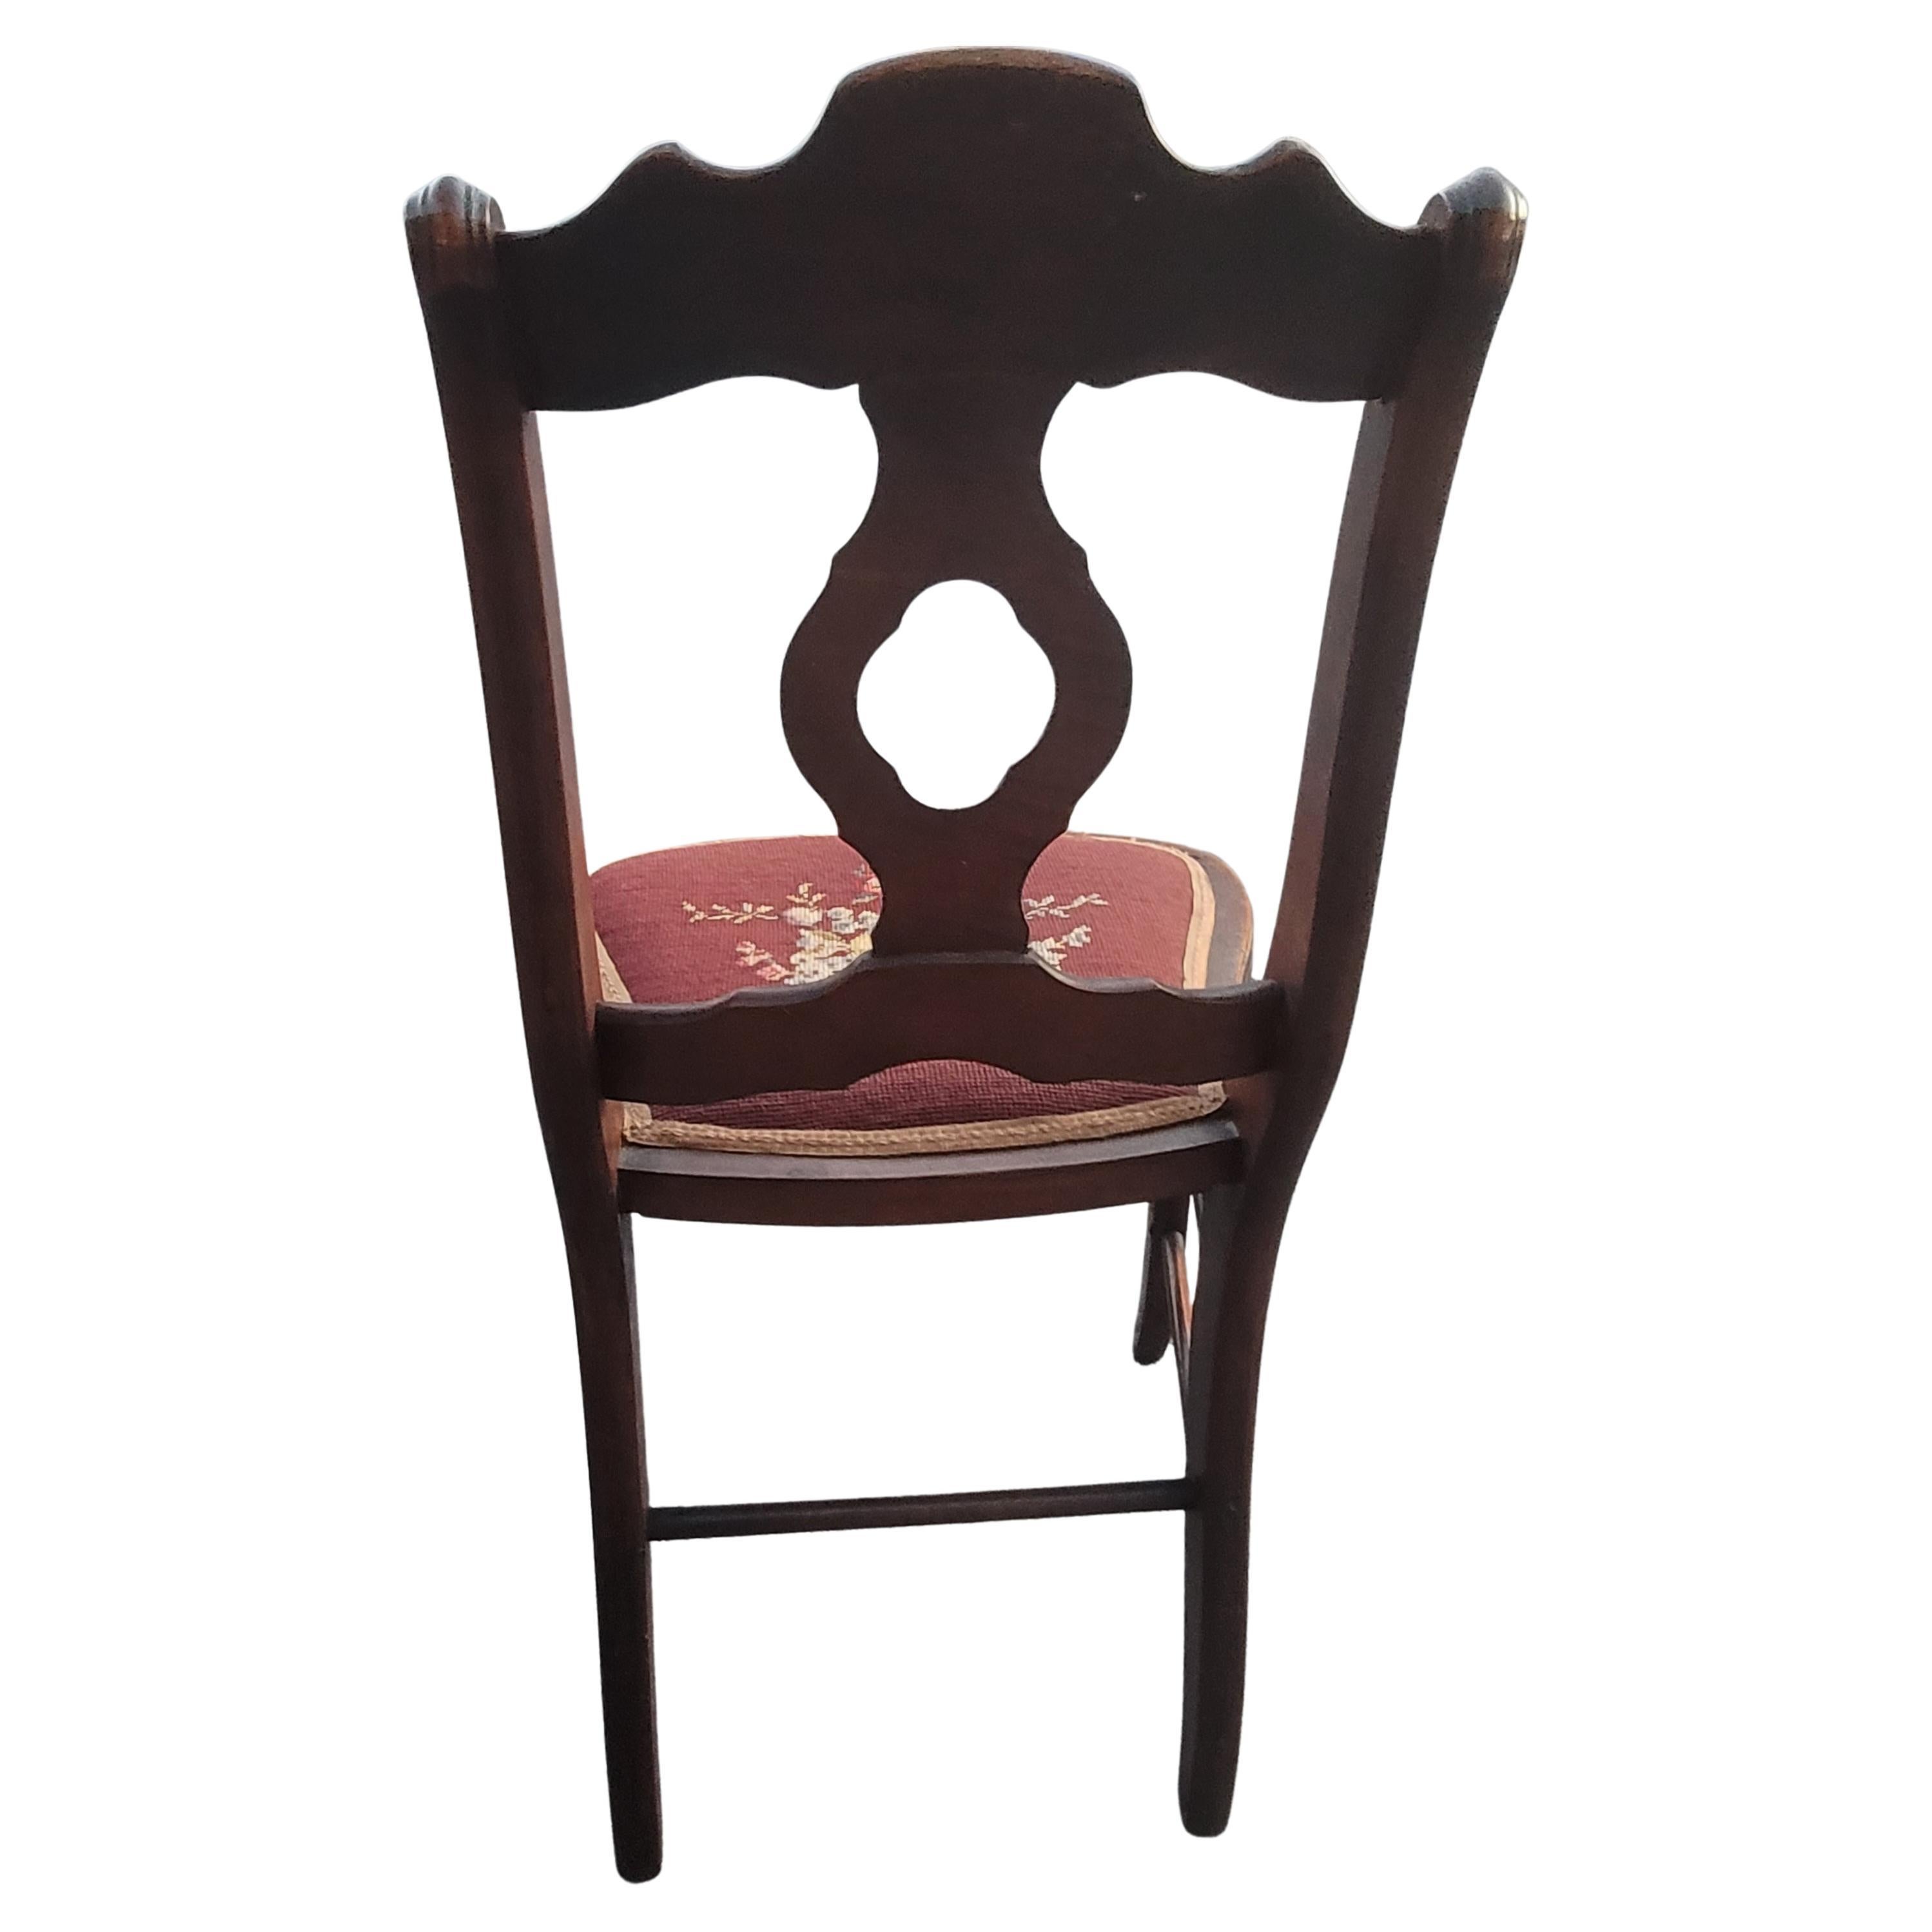 Late 19th Century Mahogany and Needlepoint Upholstered Chair with Footstool In Good Condition For Sale In Germantown, MD